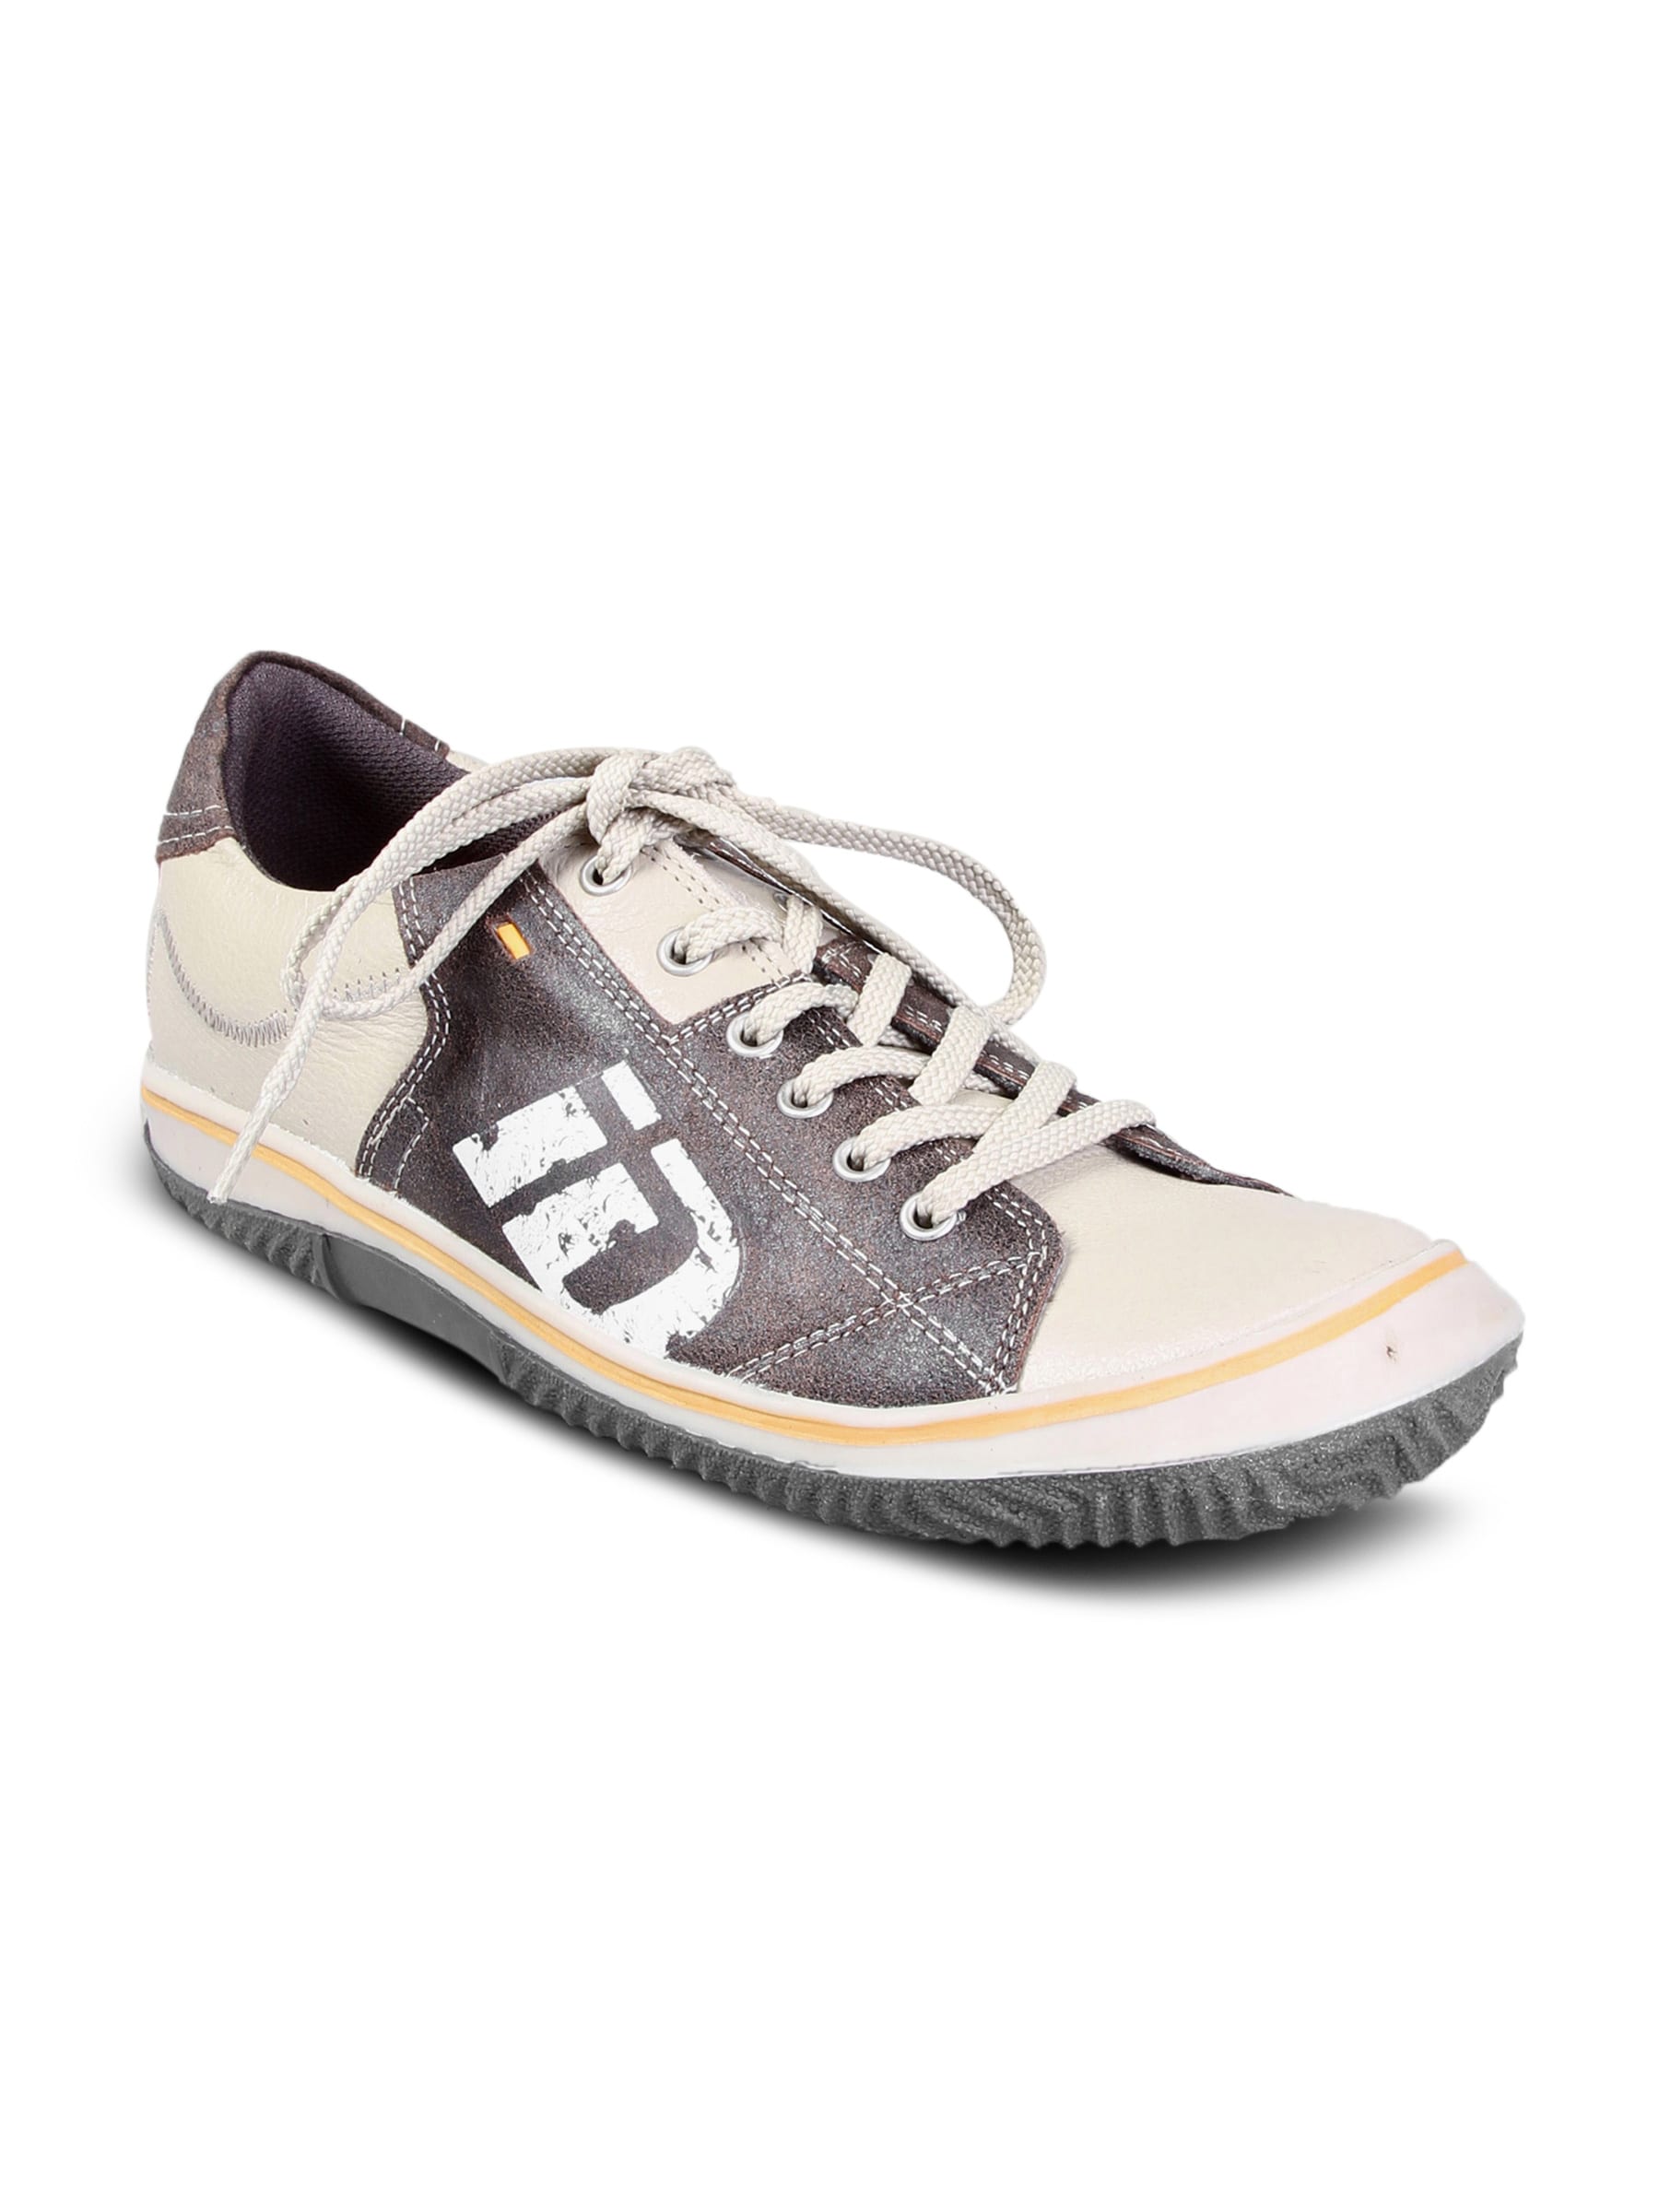 iD Men's Leather Timber White Graphic Shoe